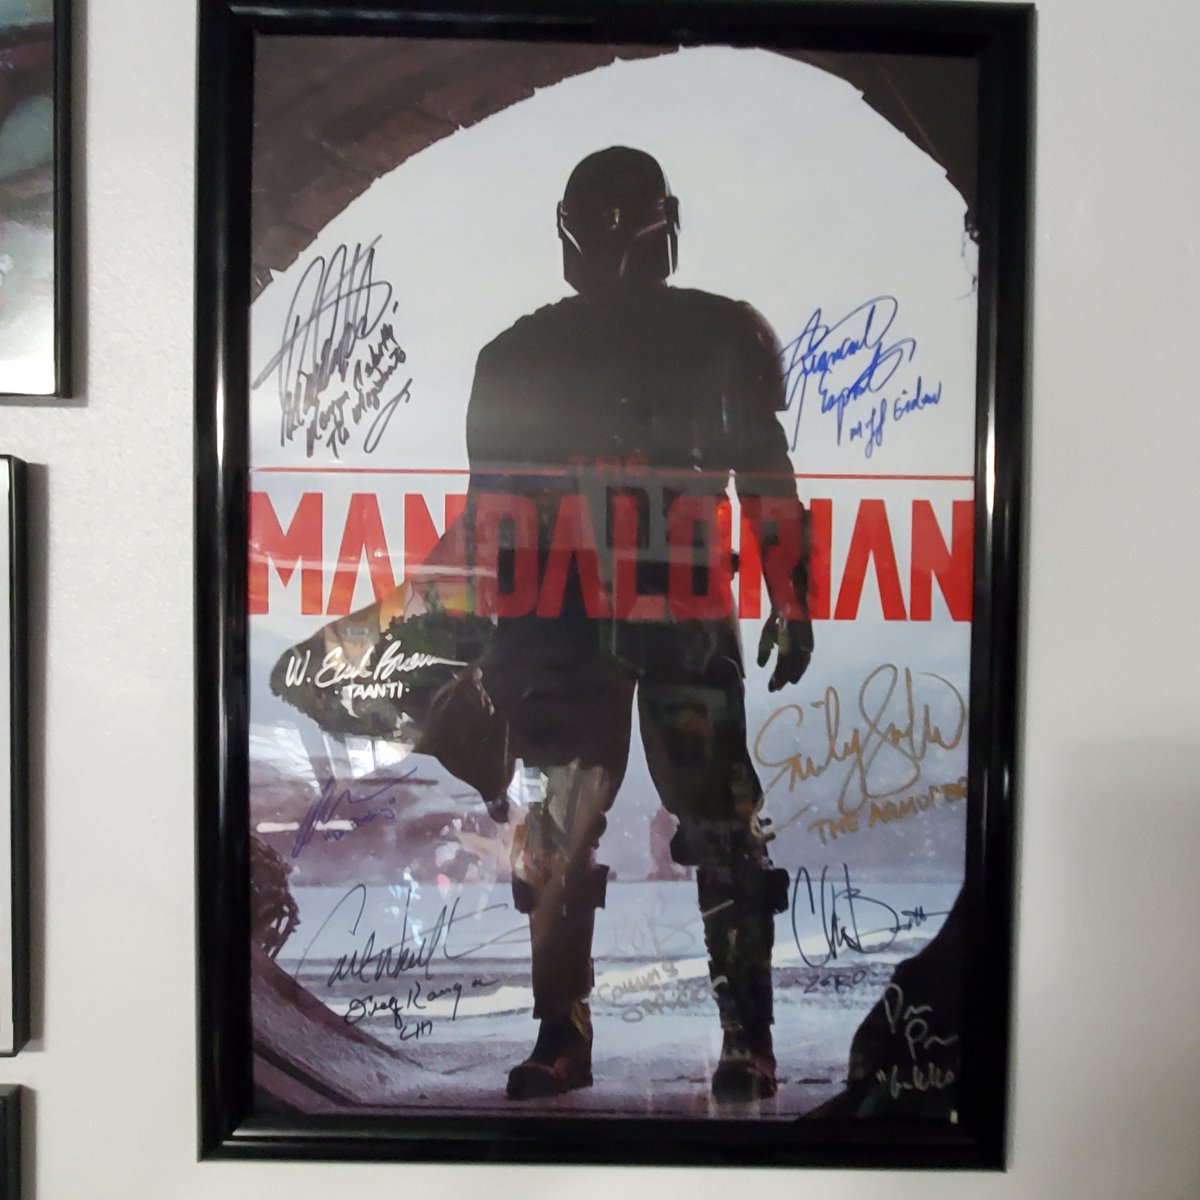 My autographed The Mandalorian poster is growing. So far this poster has been signed by. @TheRealDLI @gekkothehunter @WEarlBrown @AbtahiOmid @bigEswallz @TheCarlWeathers @chrisfbartlett @thekatyo @quiethandfilms 

#starwars #themandalorian